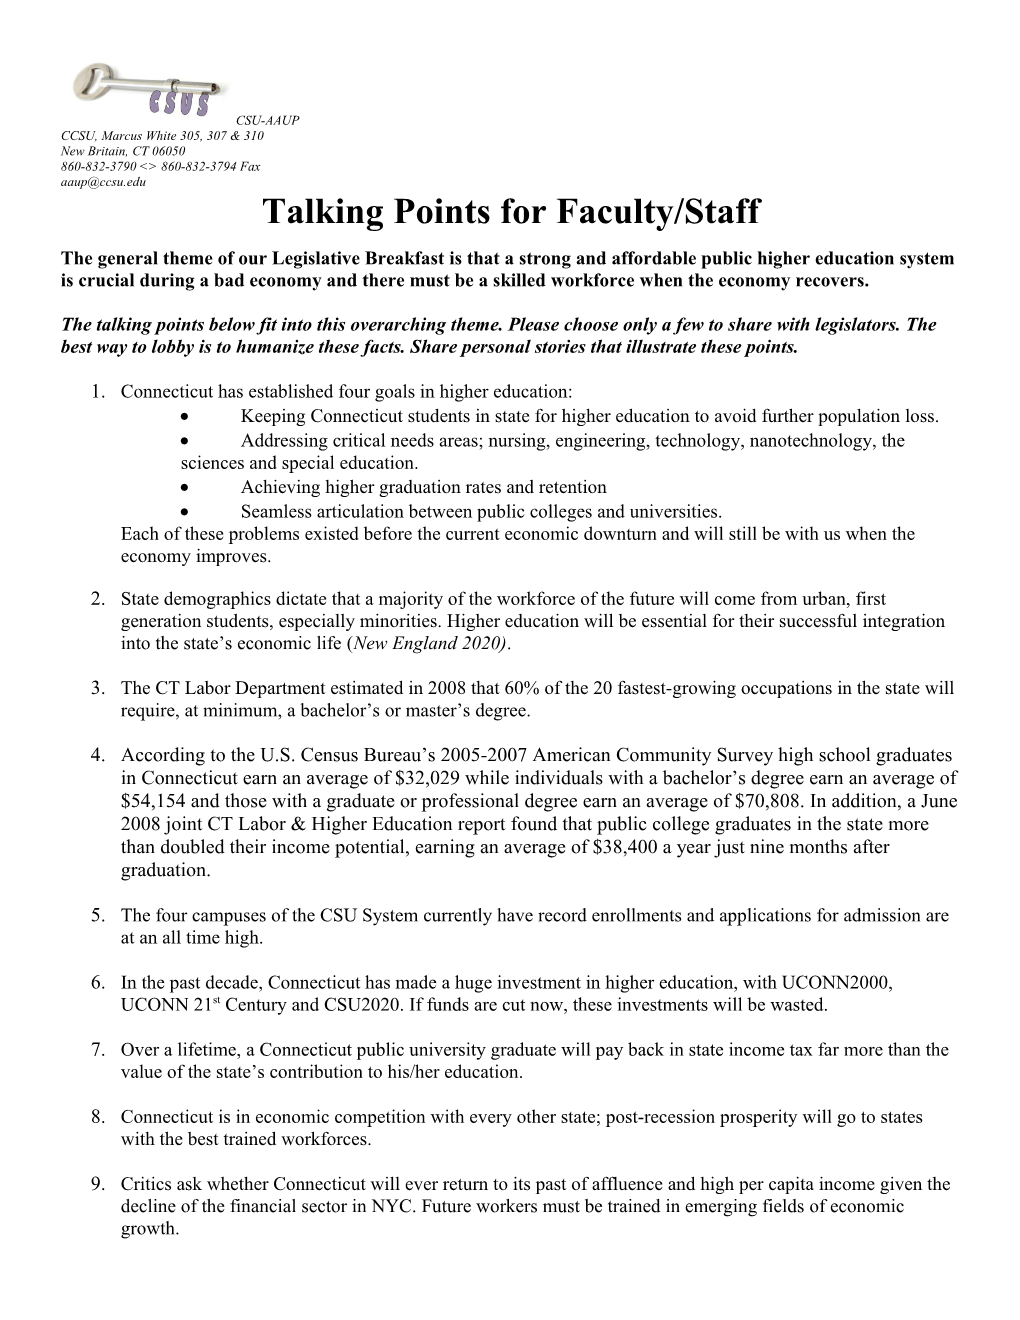 Talking Points for Faculty/Staff